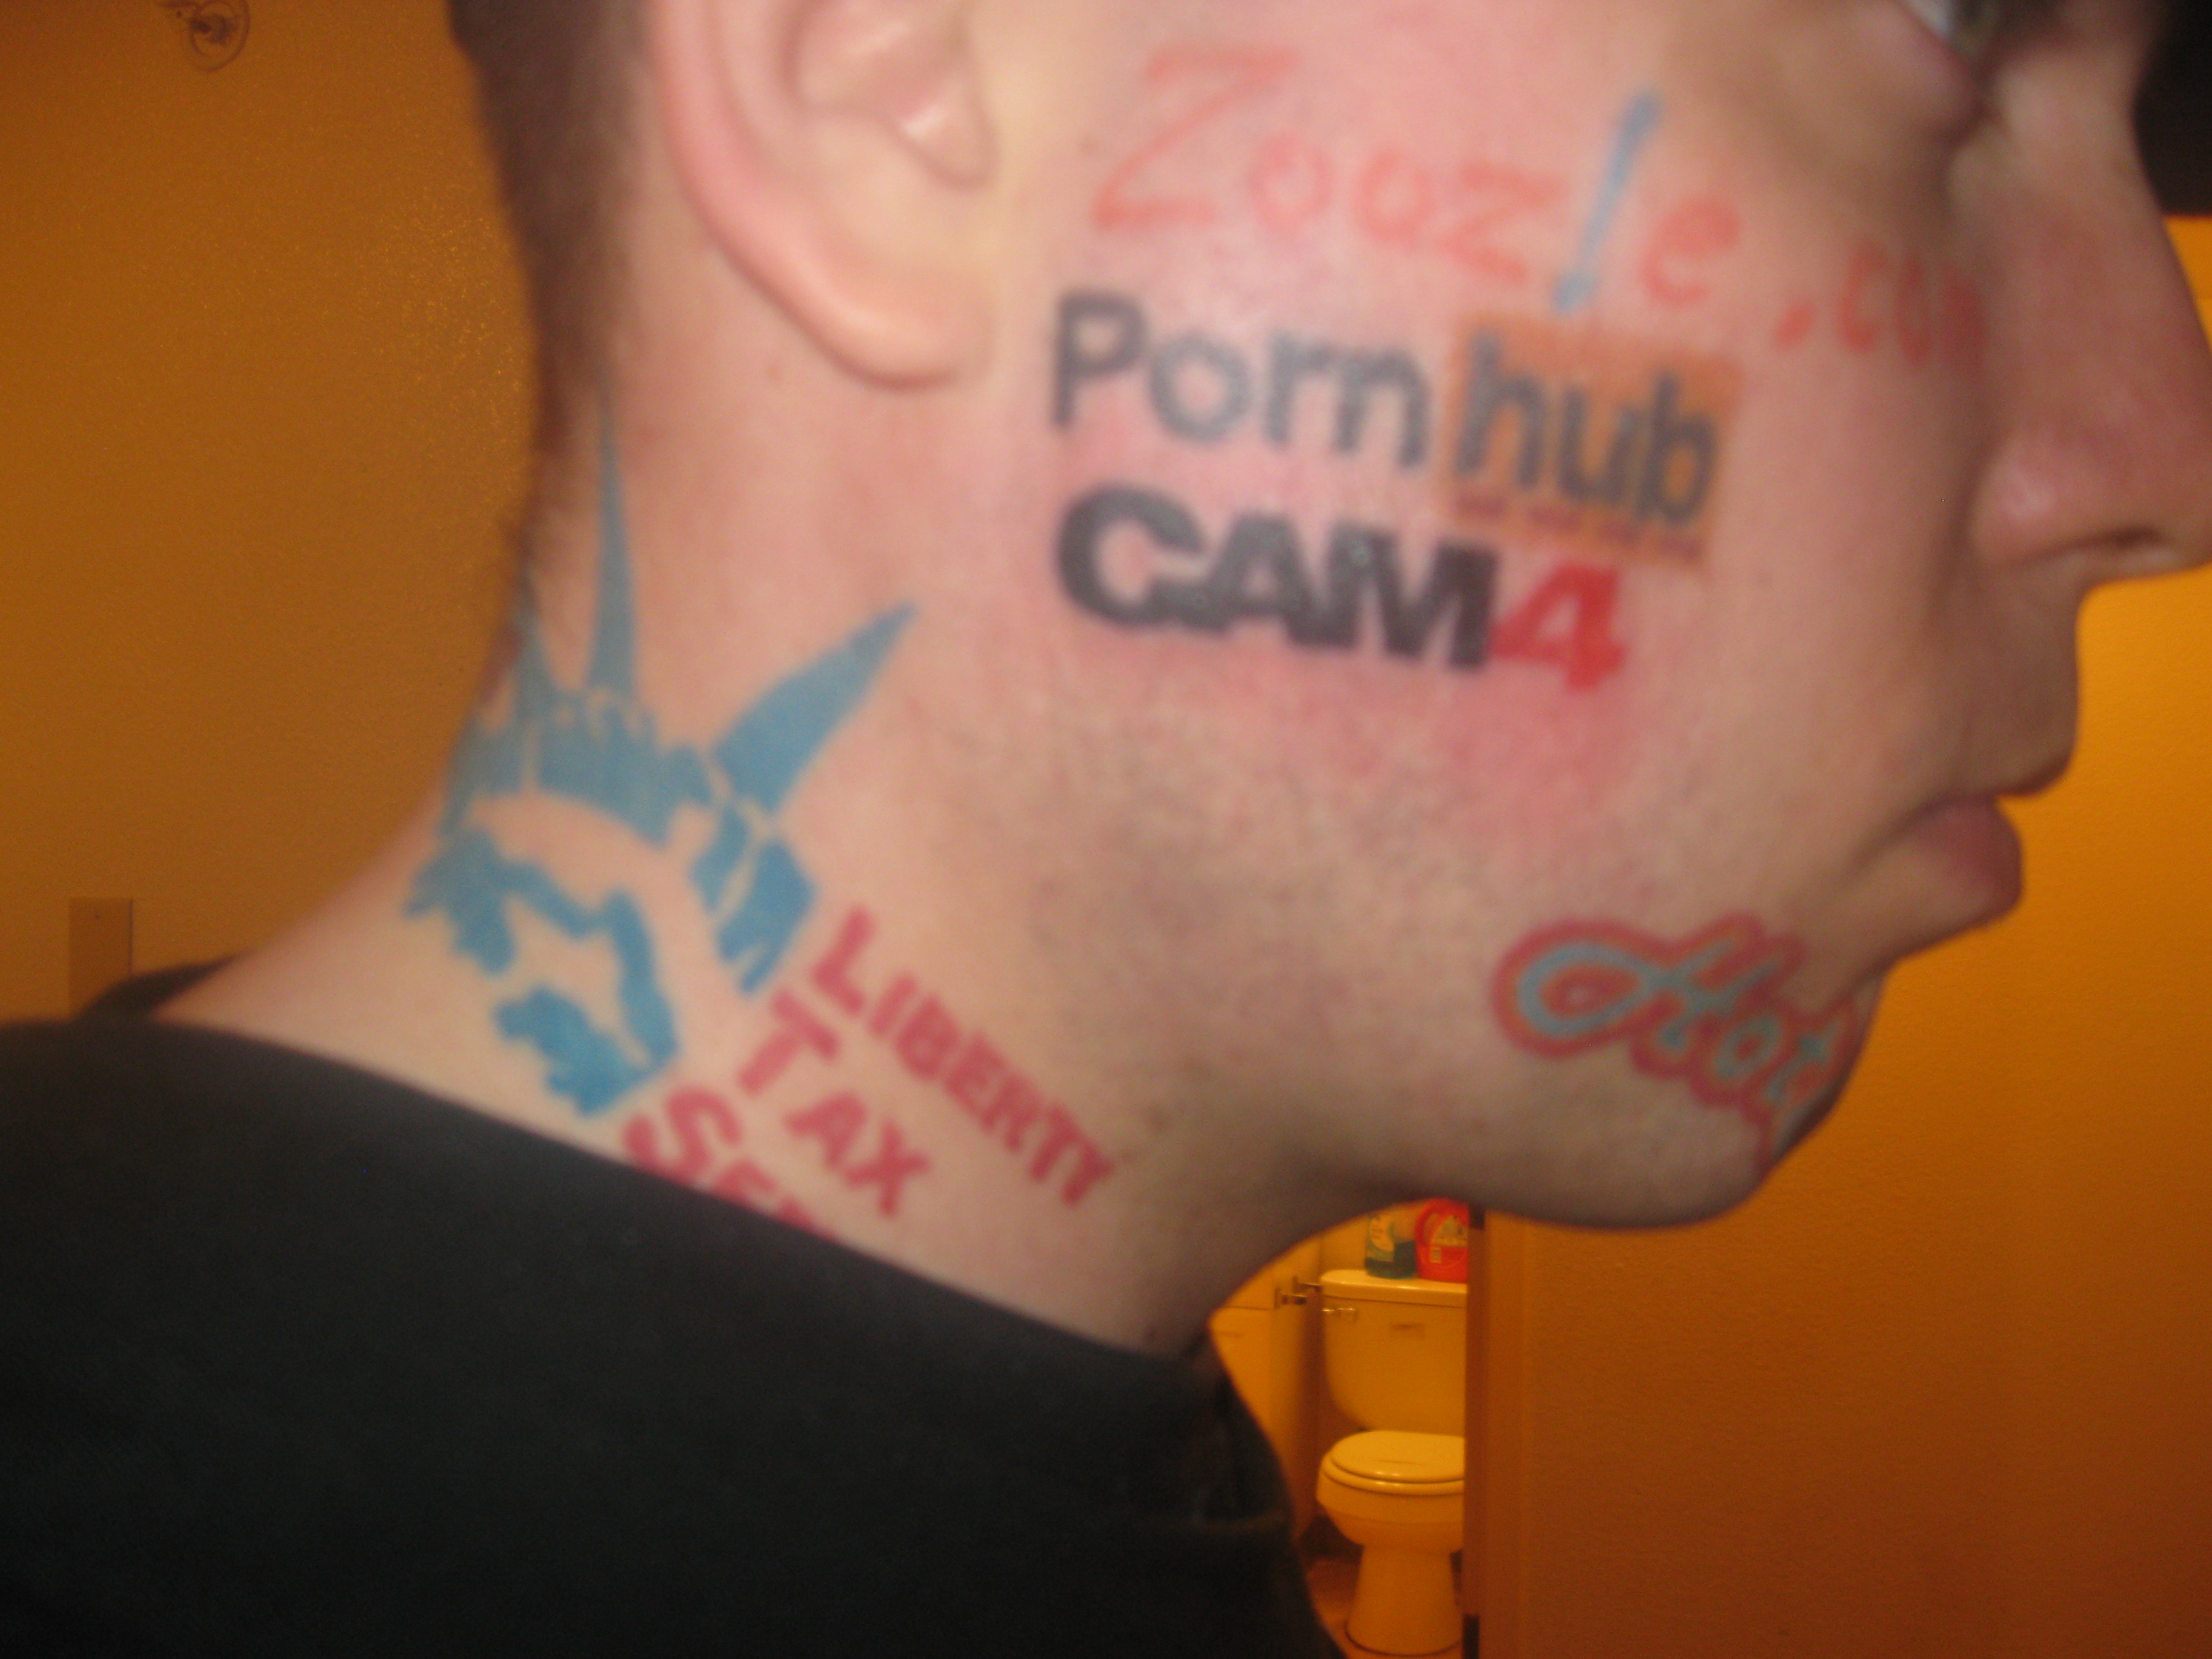 Billy's cam4 face tattoo